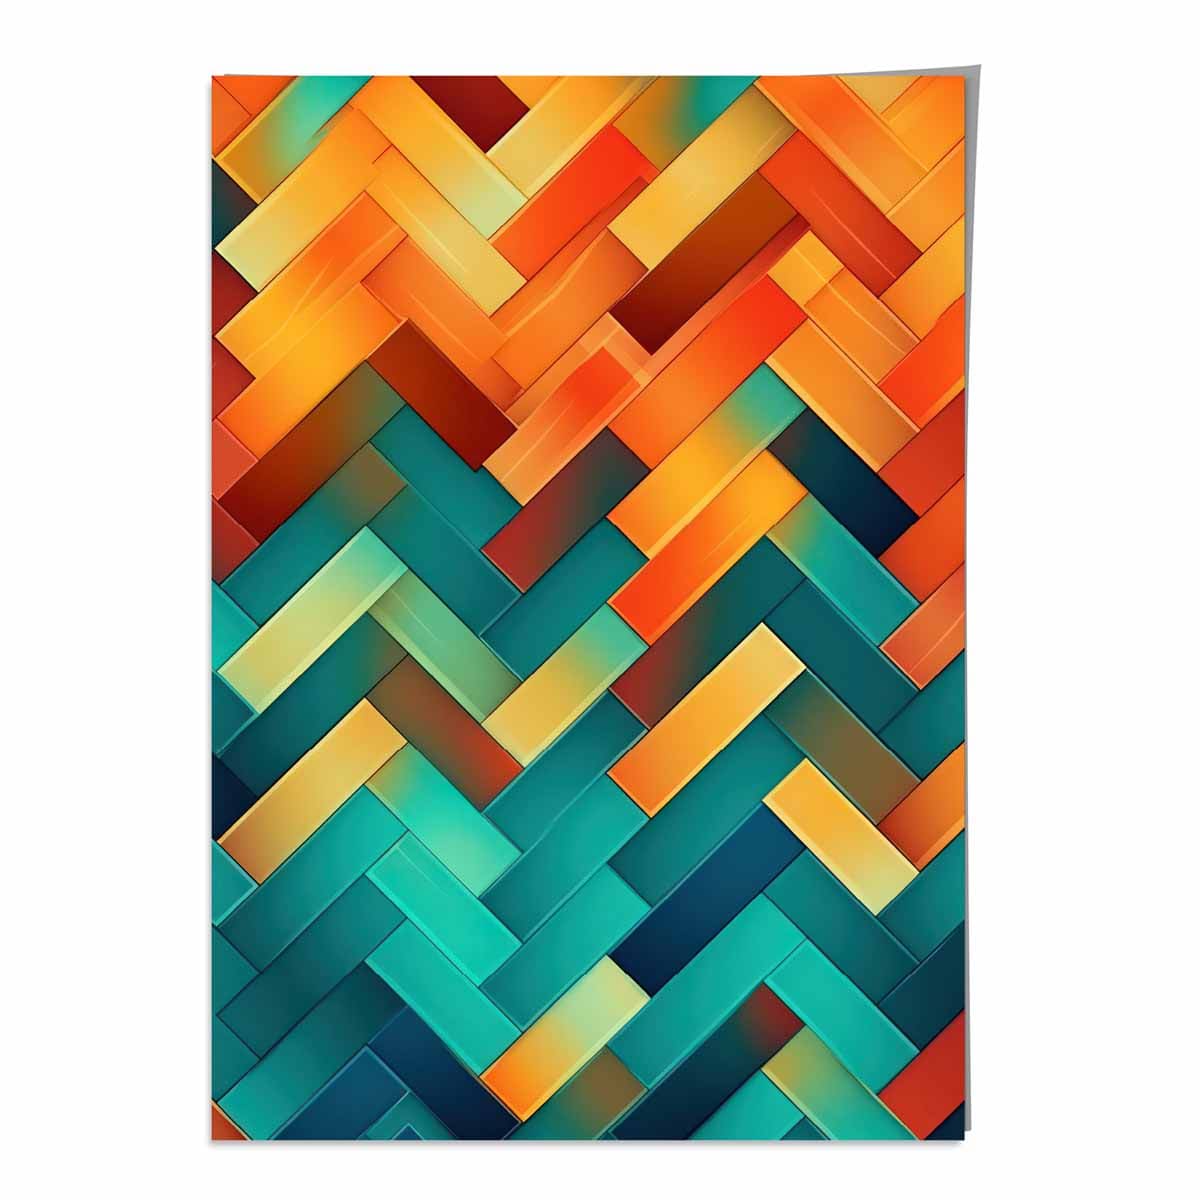 Abstract Geometric Shapes Art Print Teal Blue Orange and Red No 3